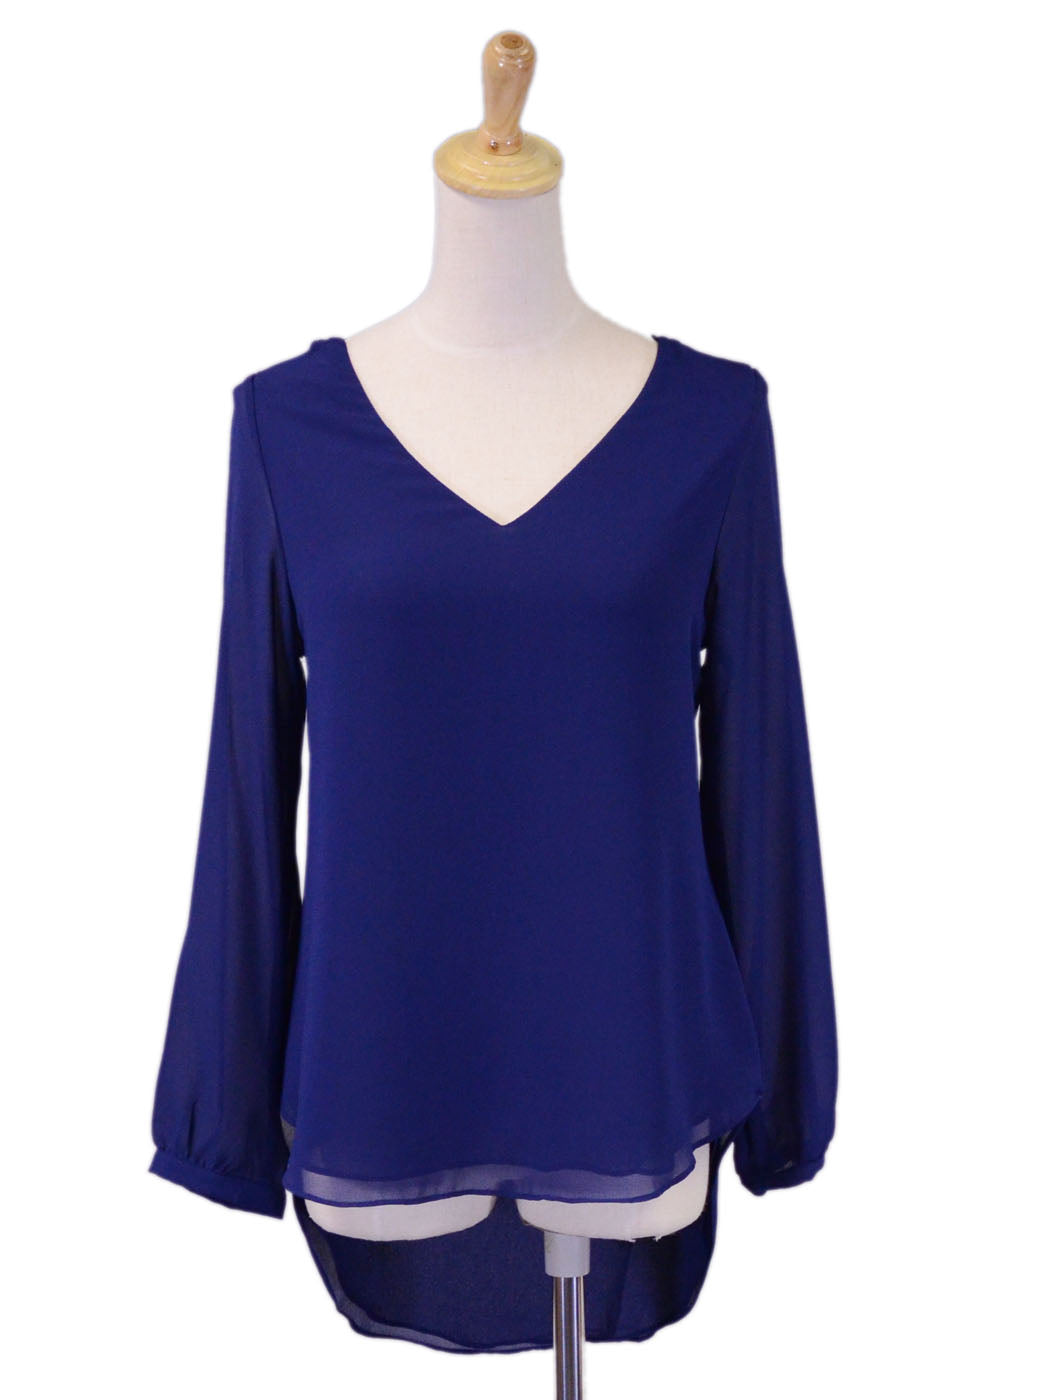 Naked Zebra Navy Blue Long Sleeved Blouse With Cutout Back And Gathered Strings - ALILANG.COM